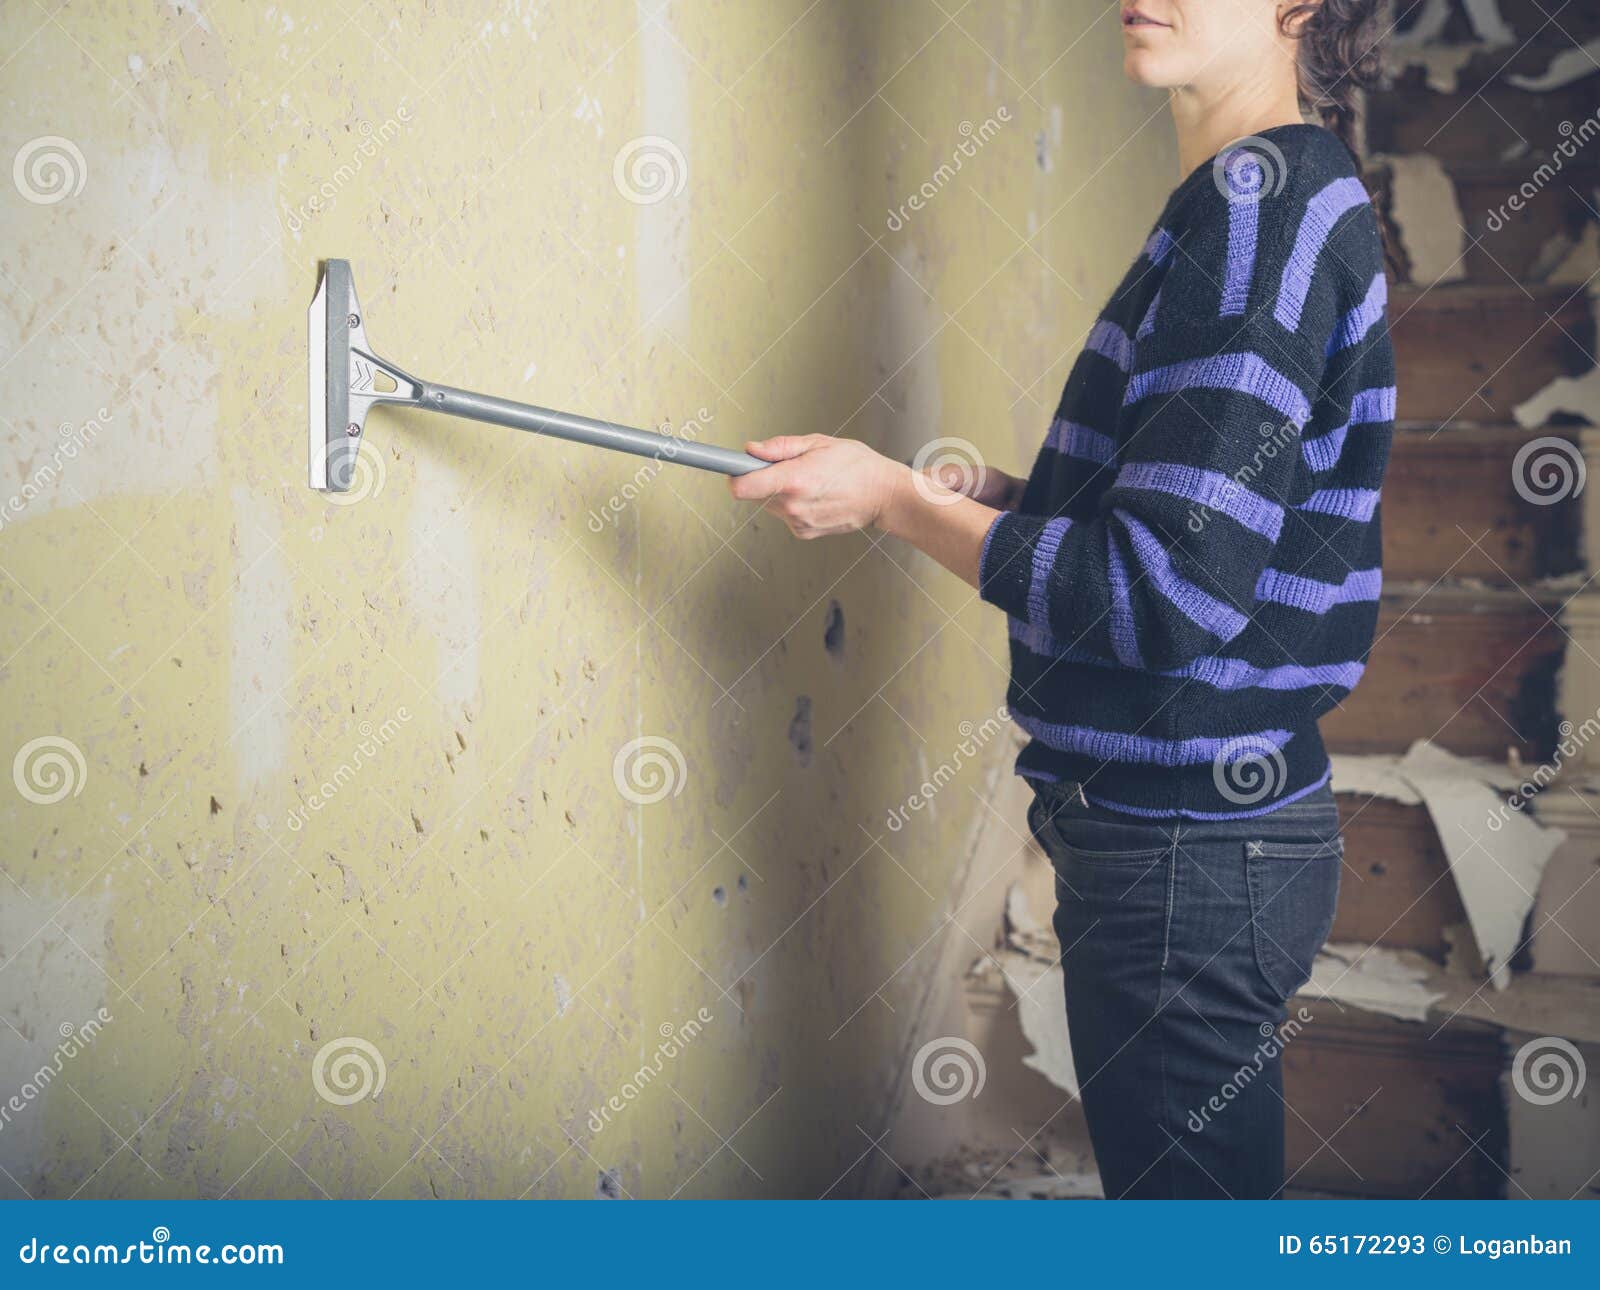 young woman stripping wallpaper